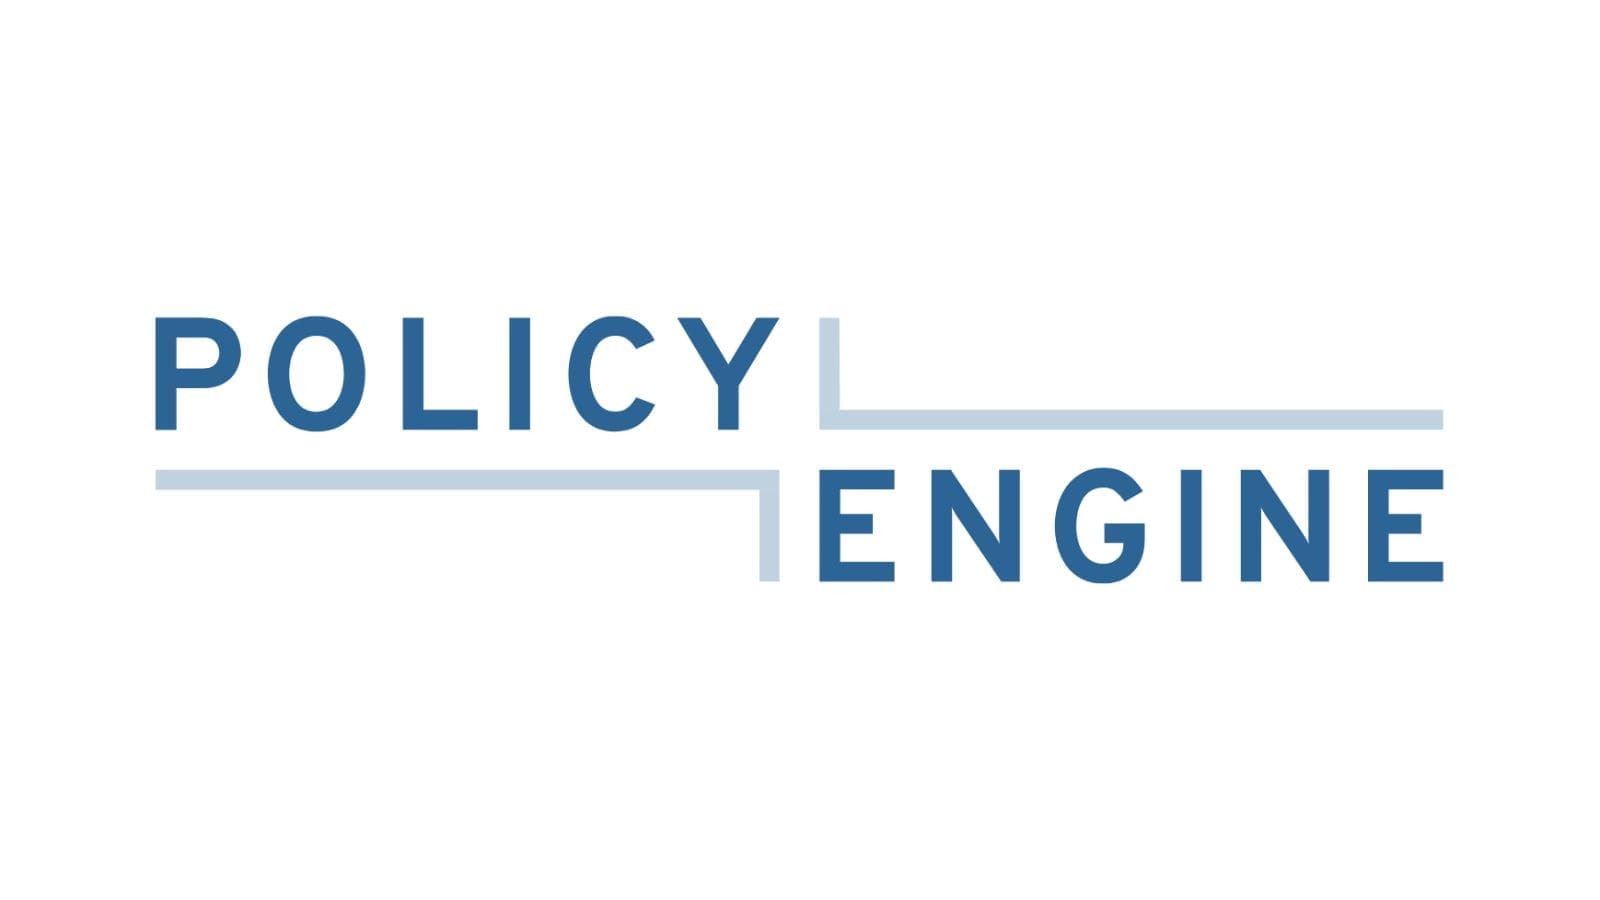 The words "POLICY ENGINE" in blue with two angled lines beside the words.